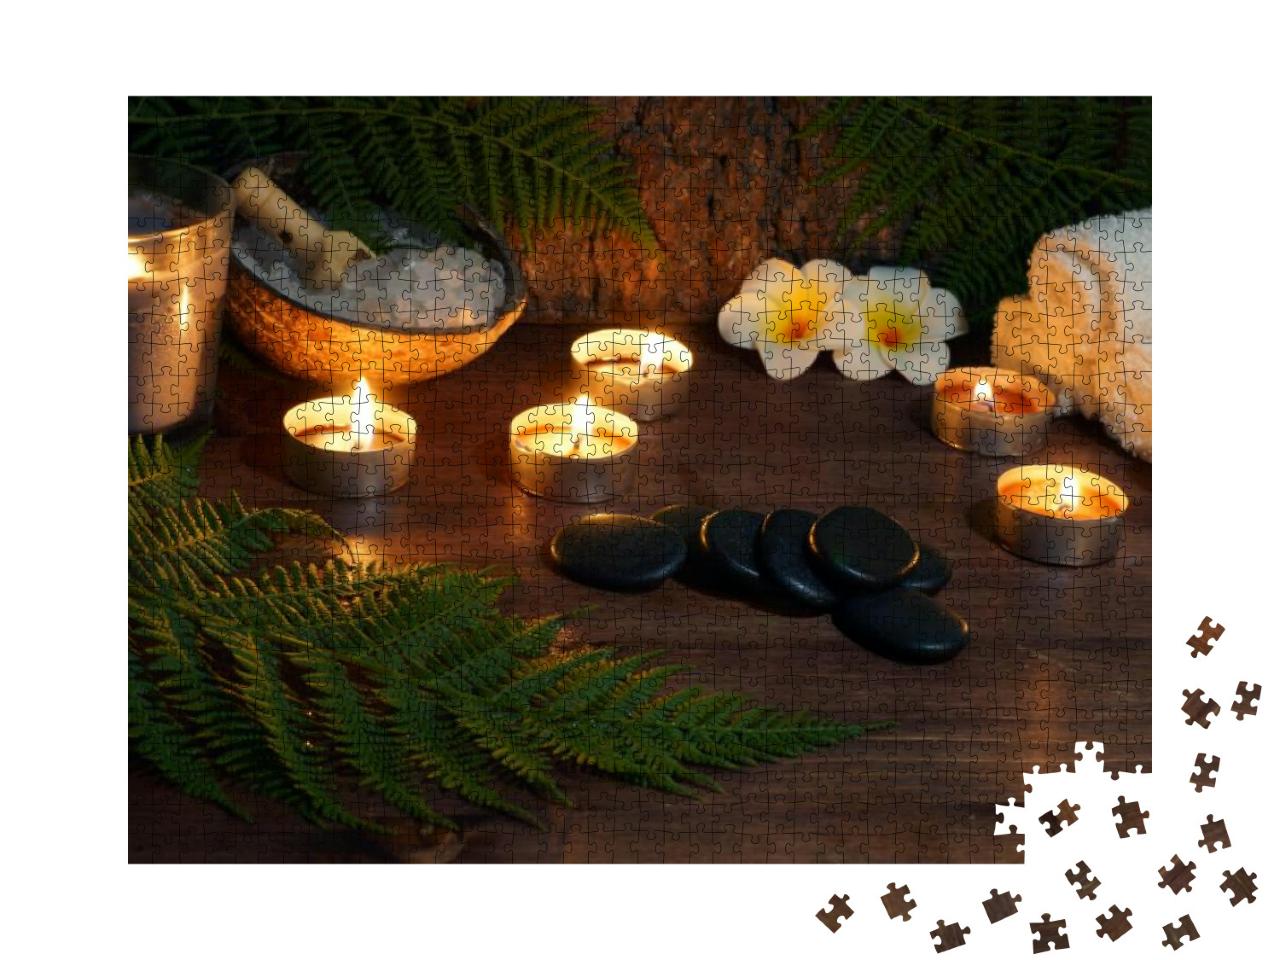 Stones for Hot Massage Are Prepared on the Table Along wi... Jigsaw Puzzle with 1000 pieces